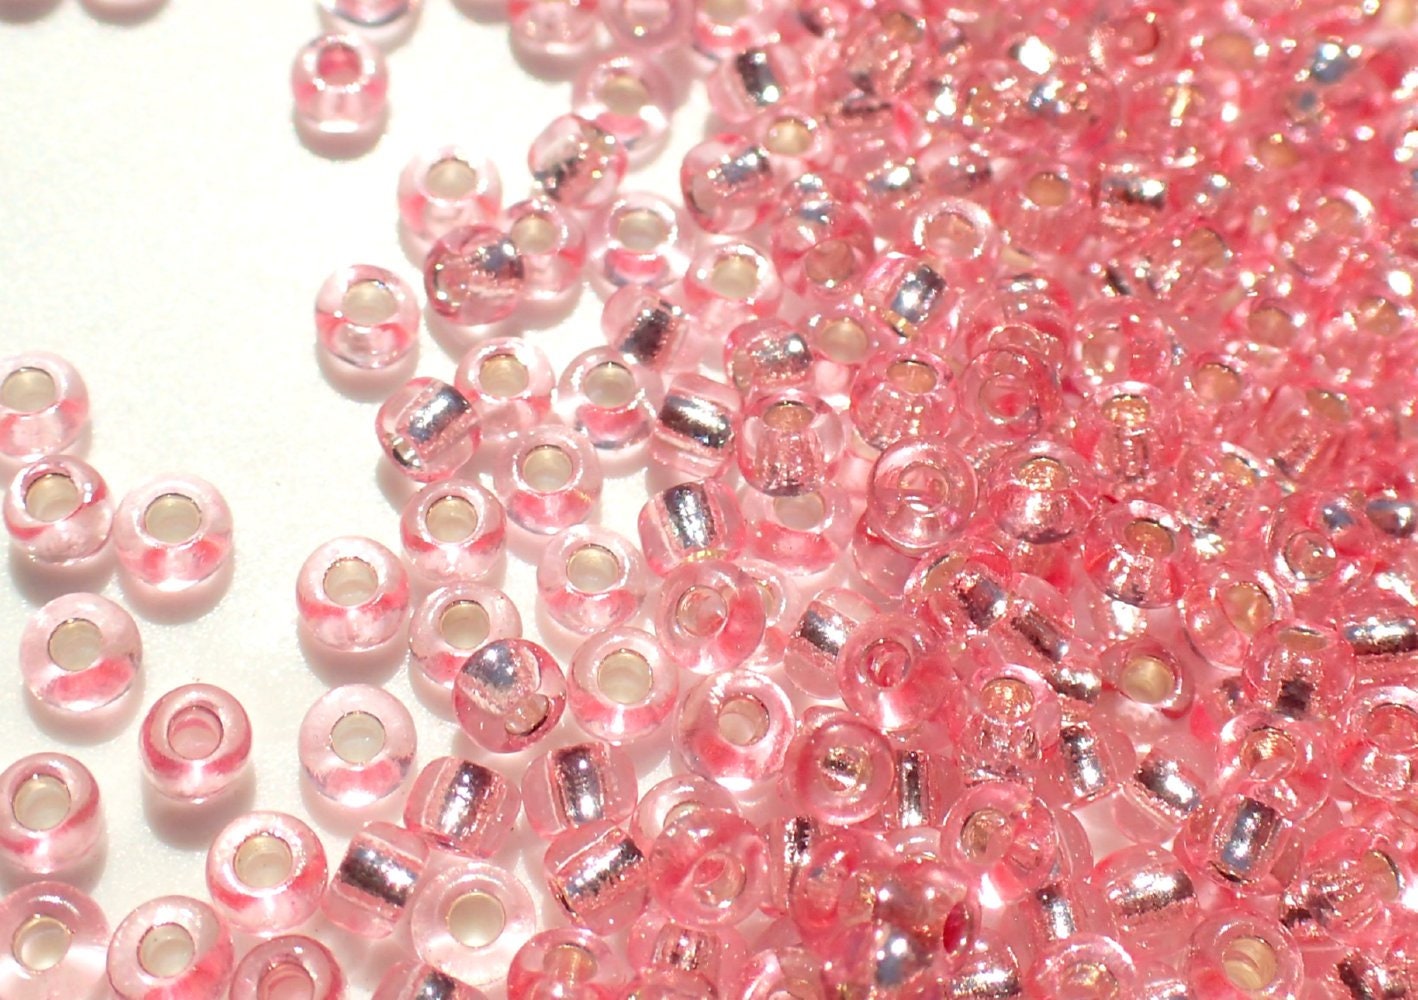 Fuchsia Silver Lined Glass Seed Beads - 2mm - 20g Spacer Beads in Dark Pink  - 1500 beads